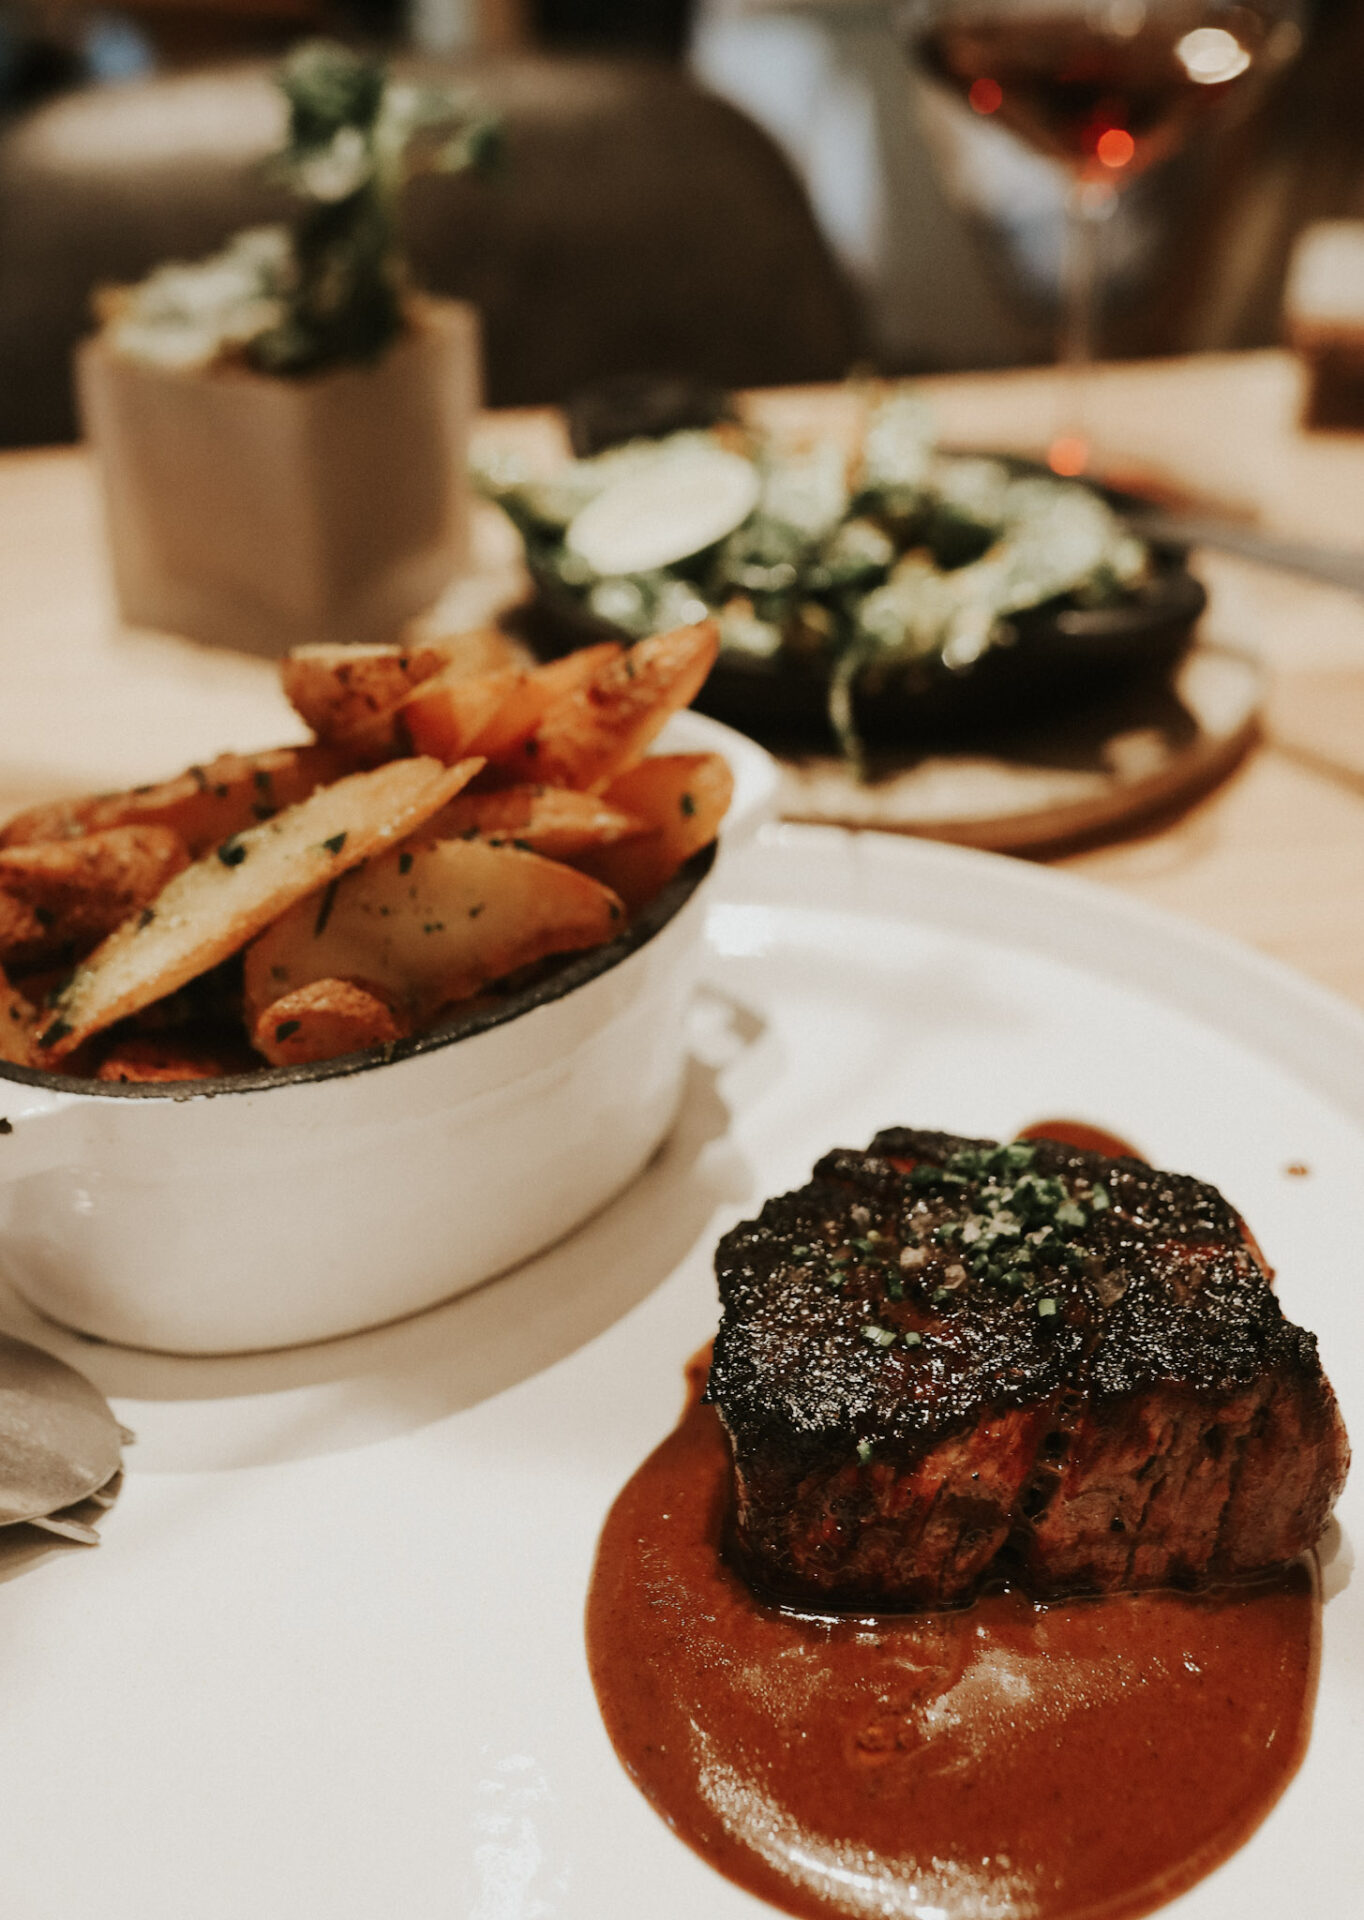 Red wine with steak and frites pairing